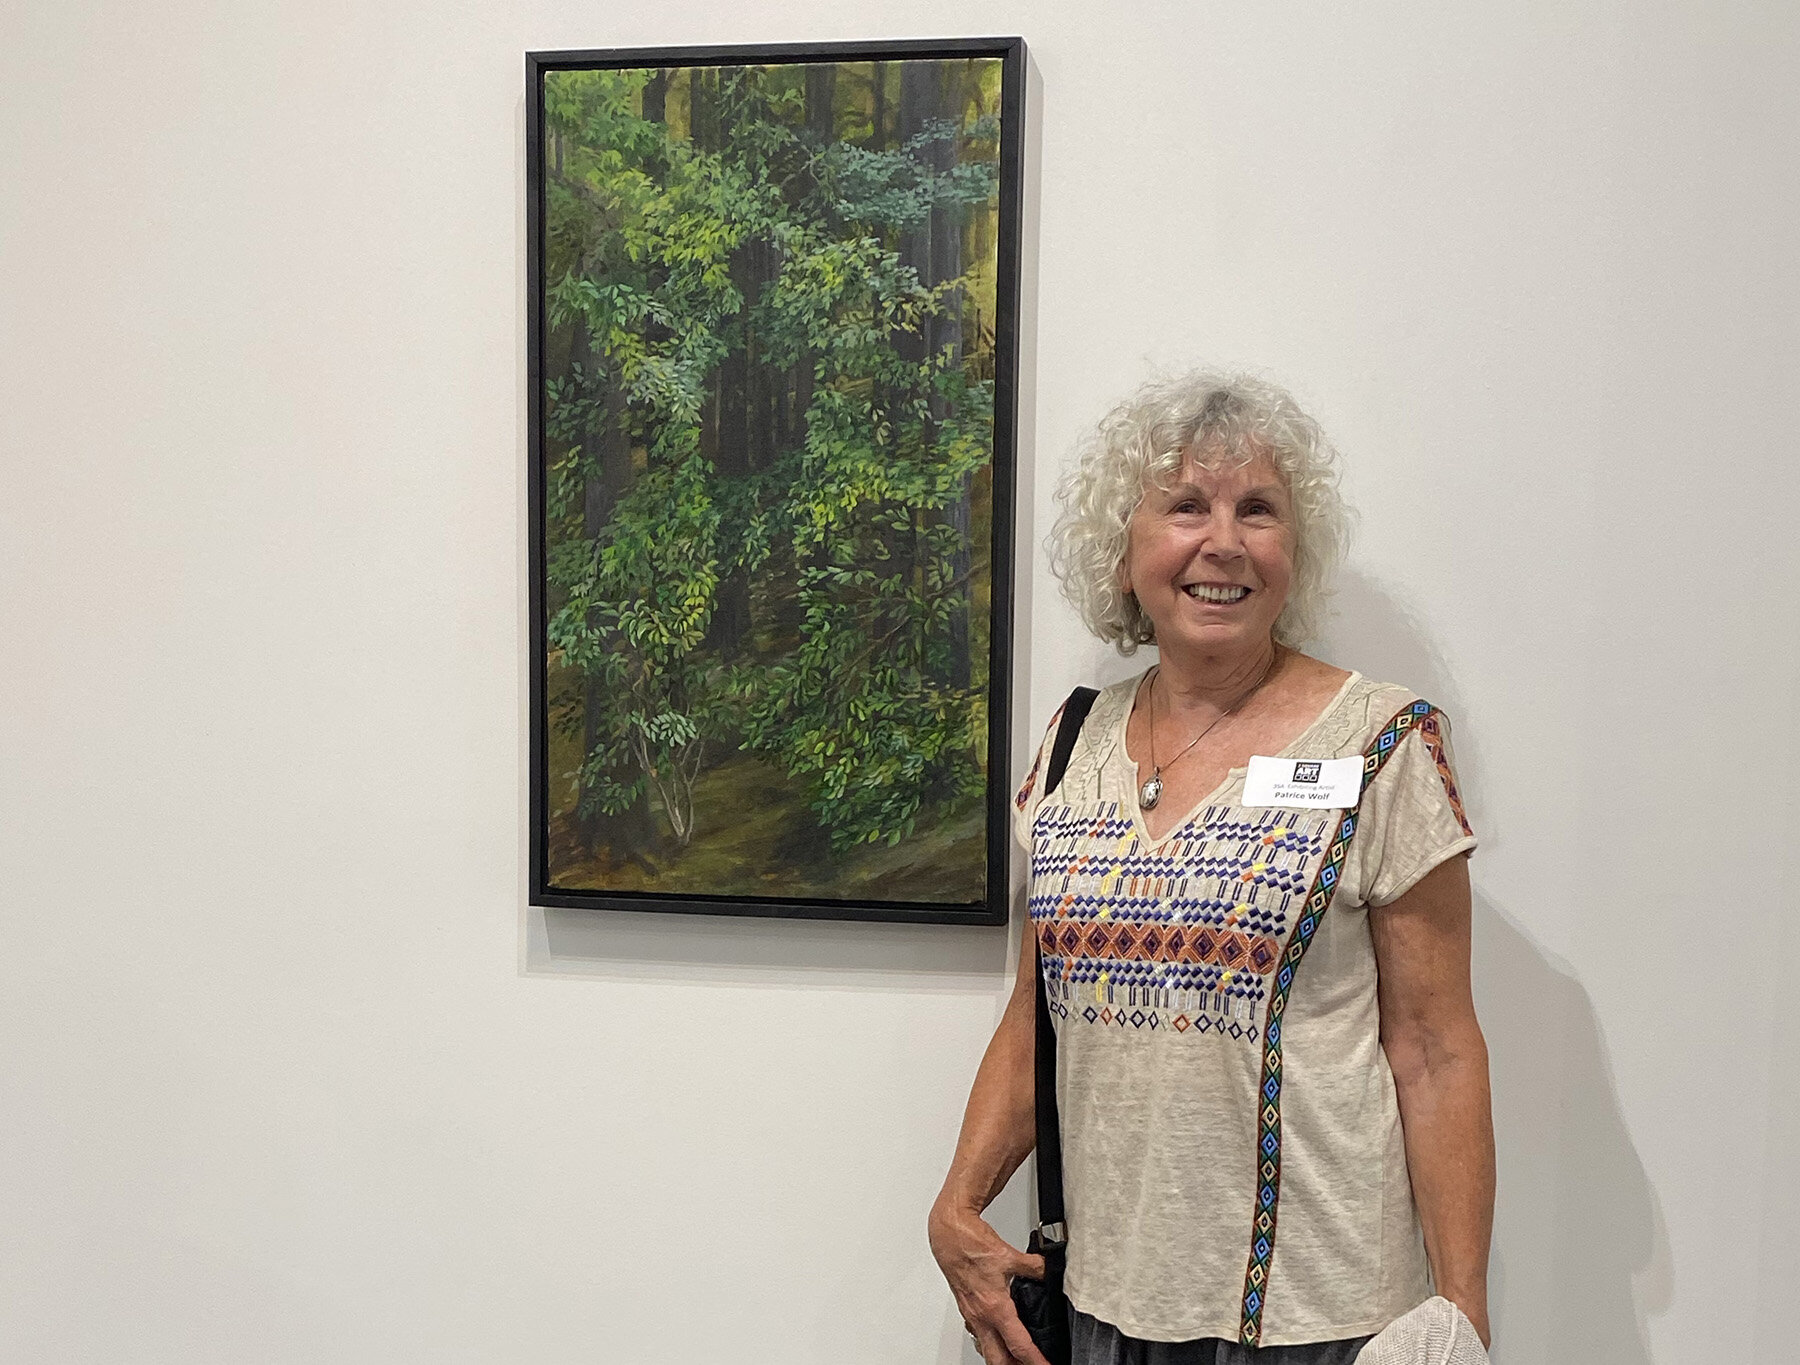   Patrice Wolf  with her painting “Self Portrait in Woods” 